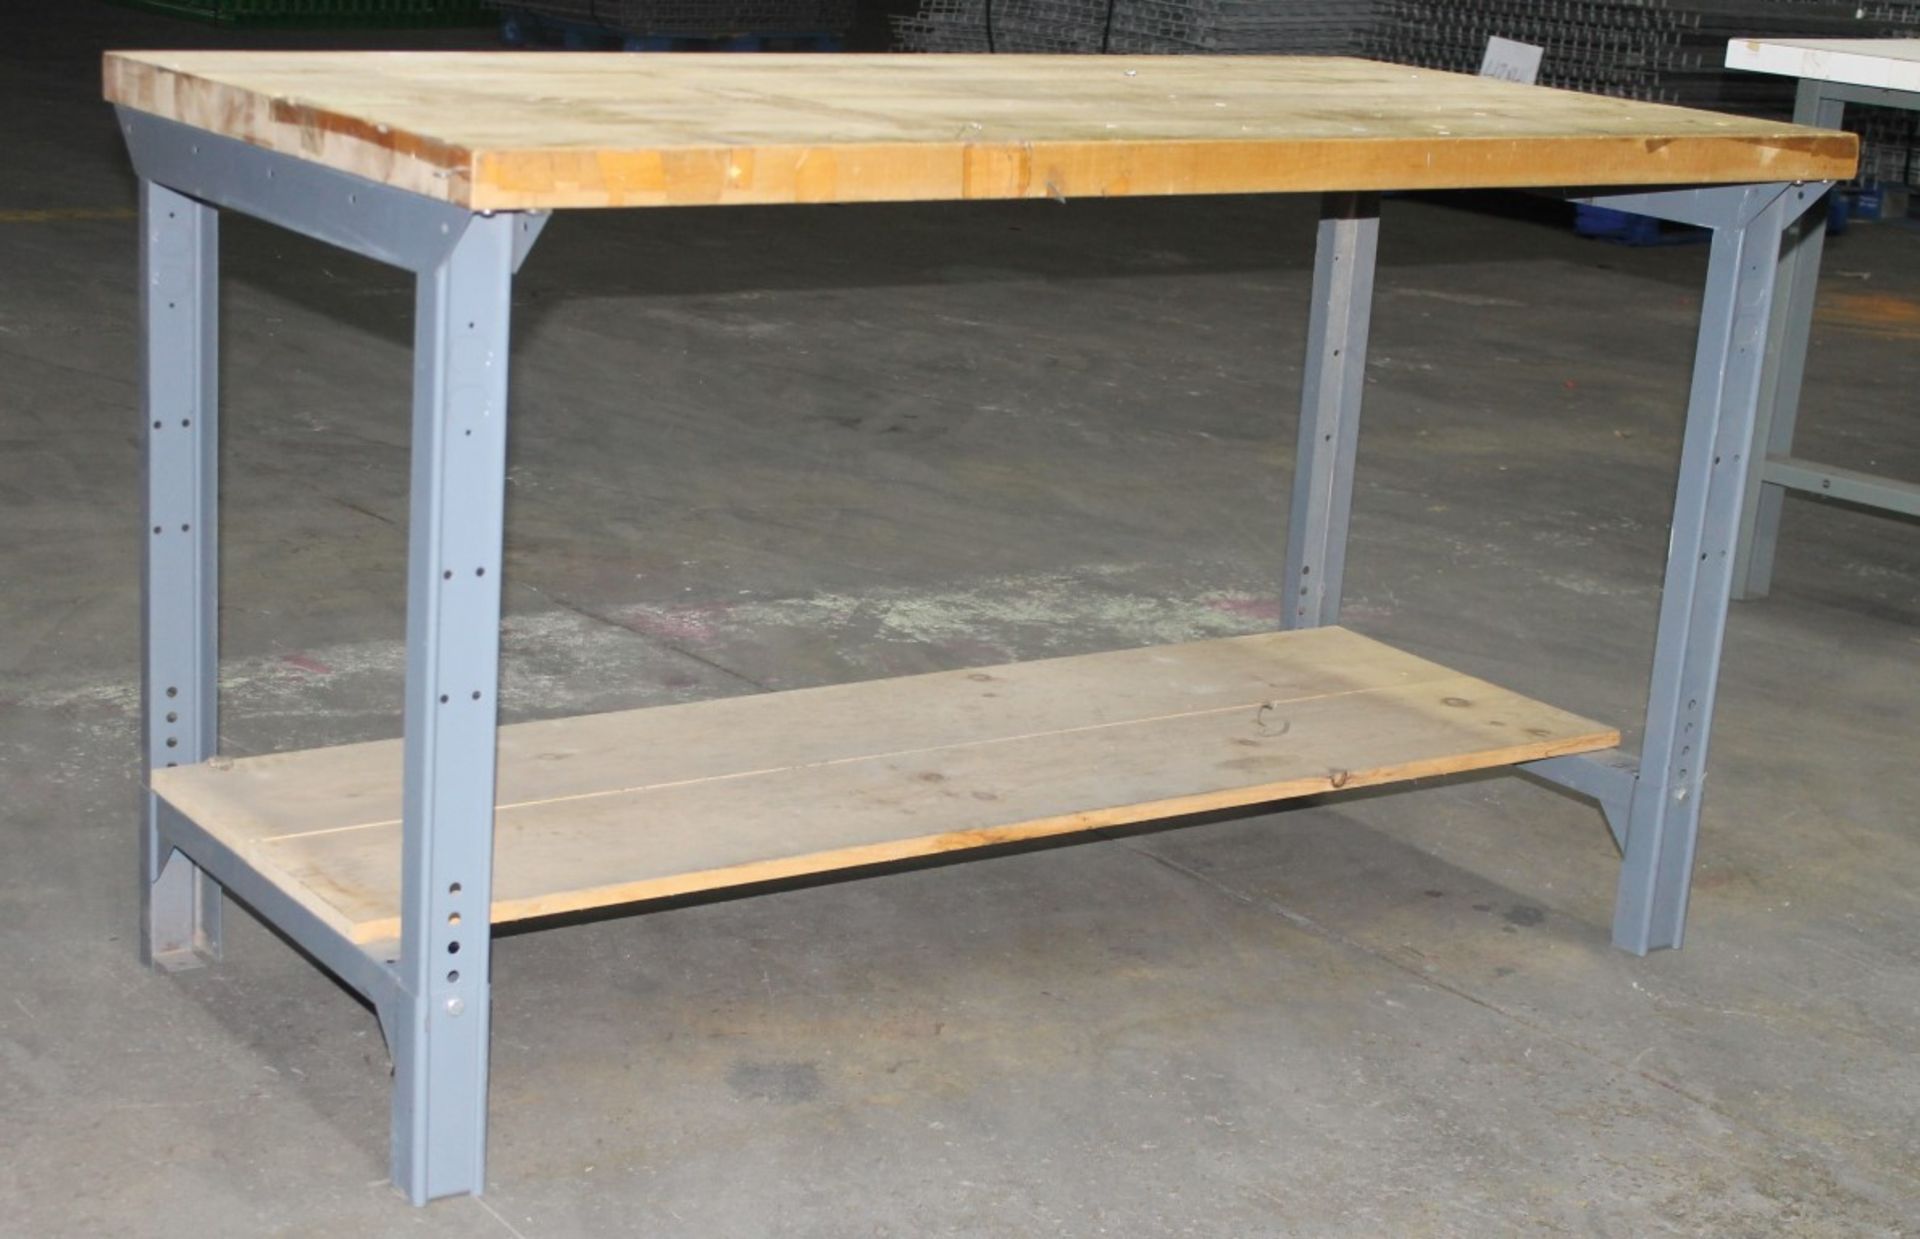 60"W X 30"D HEAVY DUTY WORK BENCH WITH 1-1/2" WOODEN TOP - Image 2 of 2